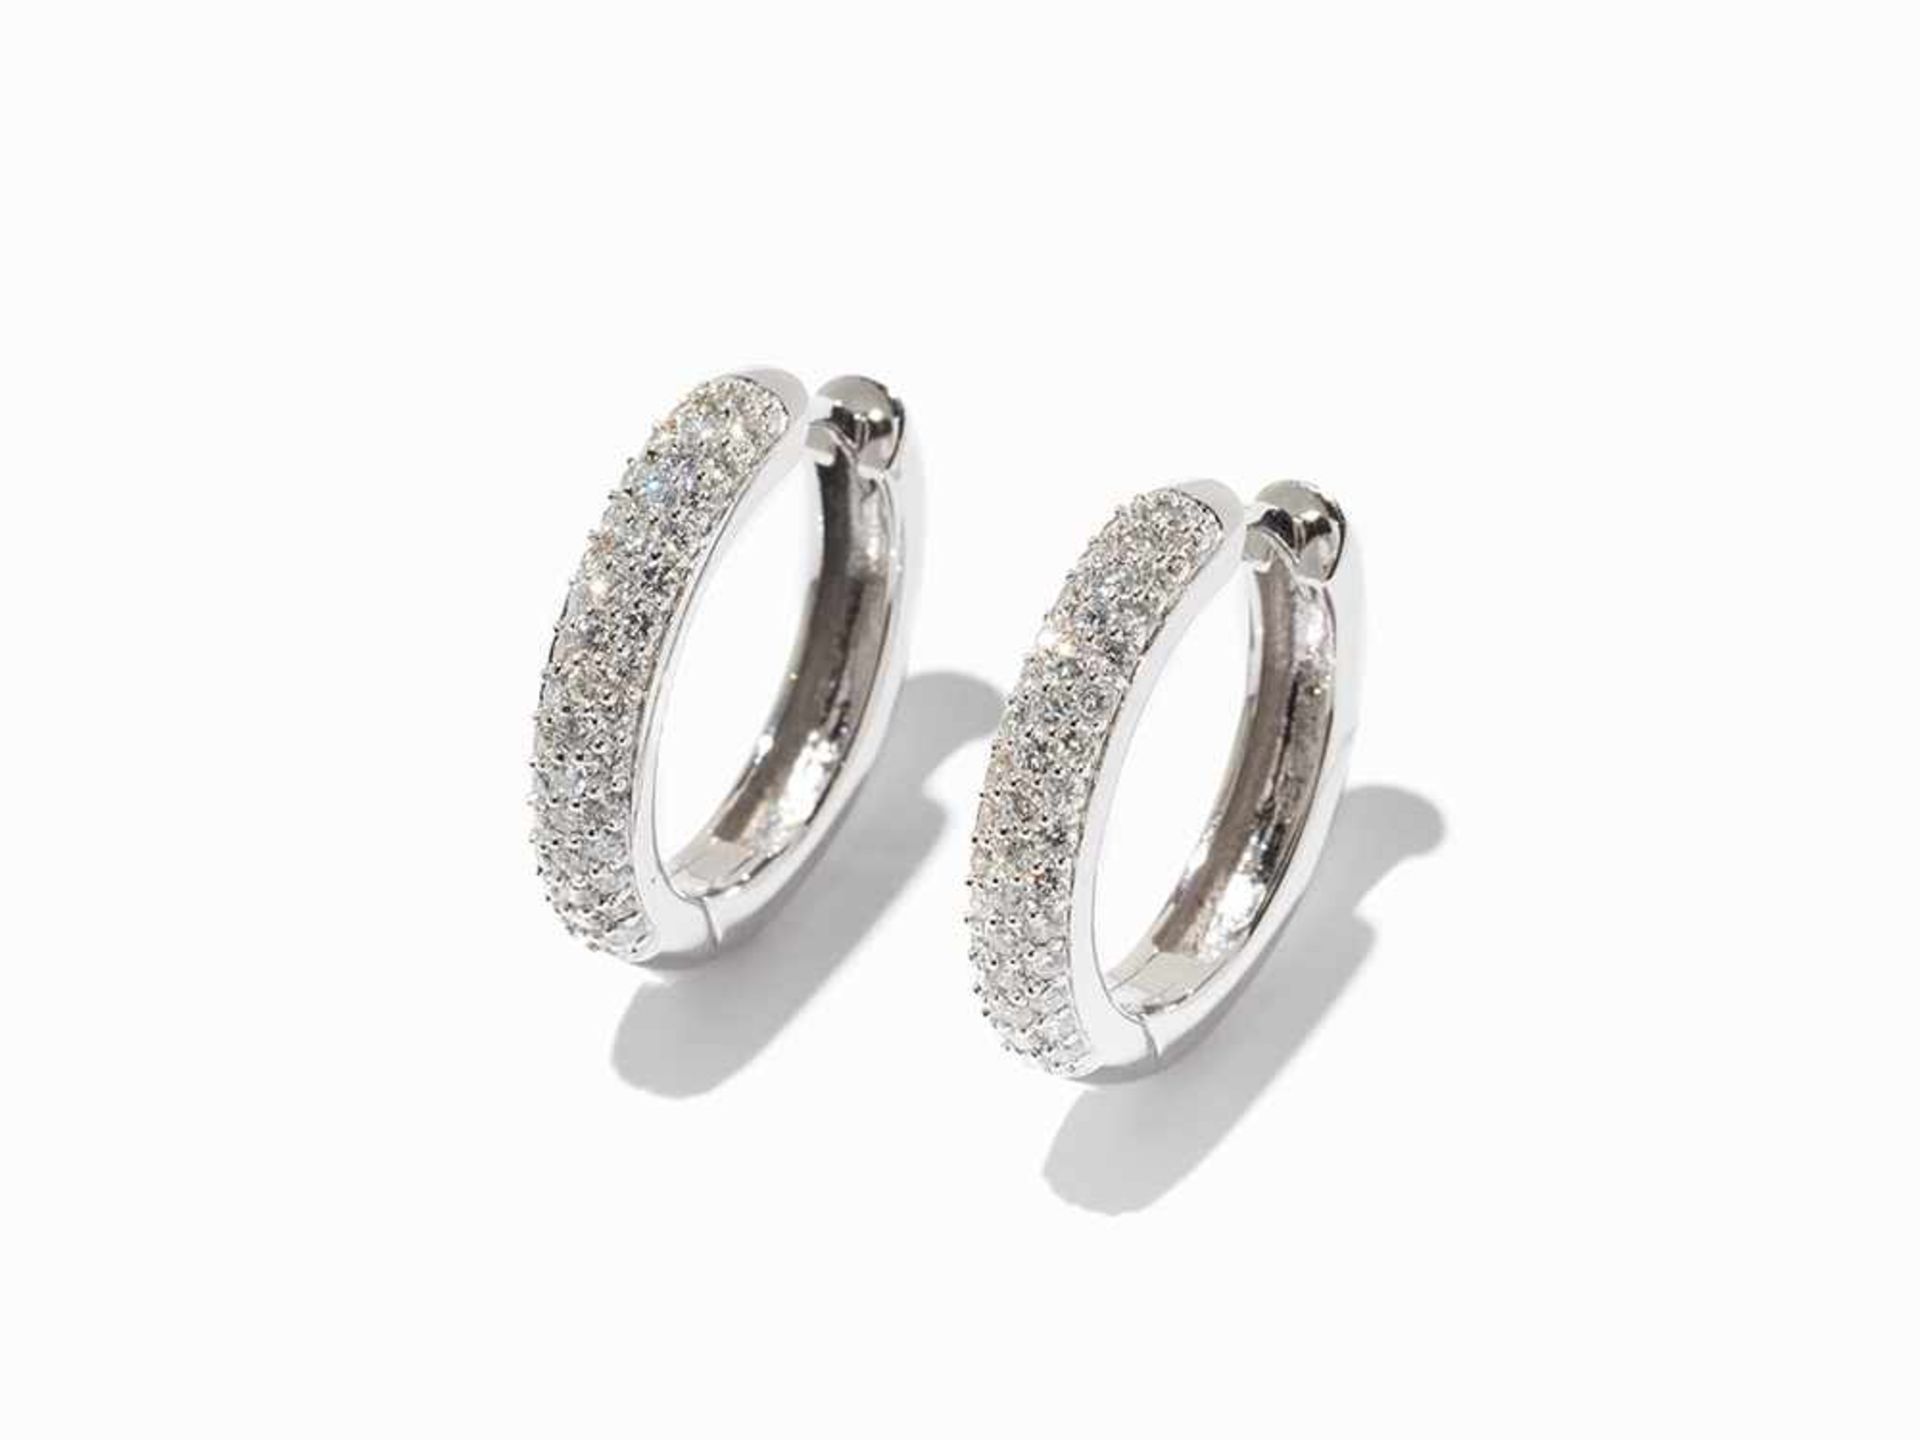 Pair of Creoles with 86 Diamonds of c. 0.90 ct., 18K White Gold 18 karat white gold Germany, 20th